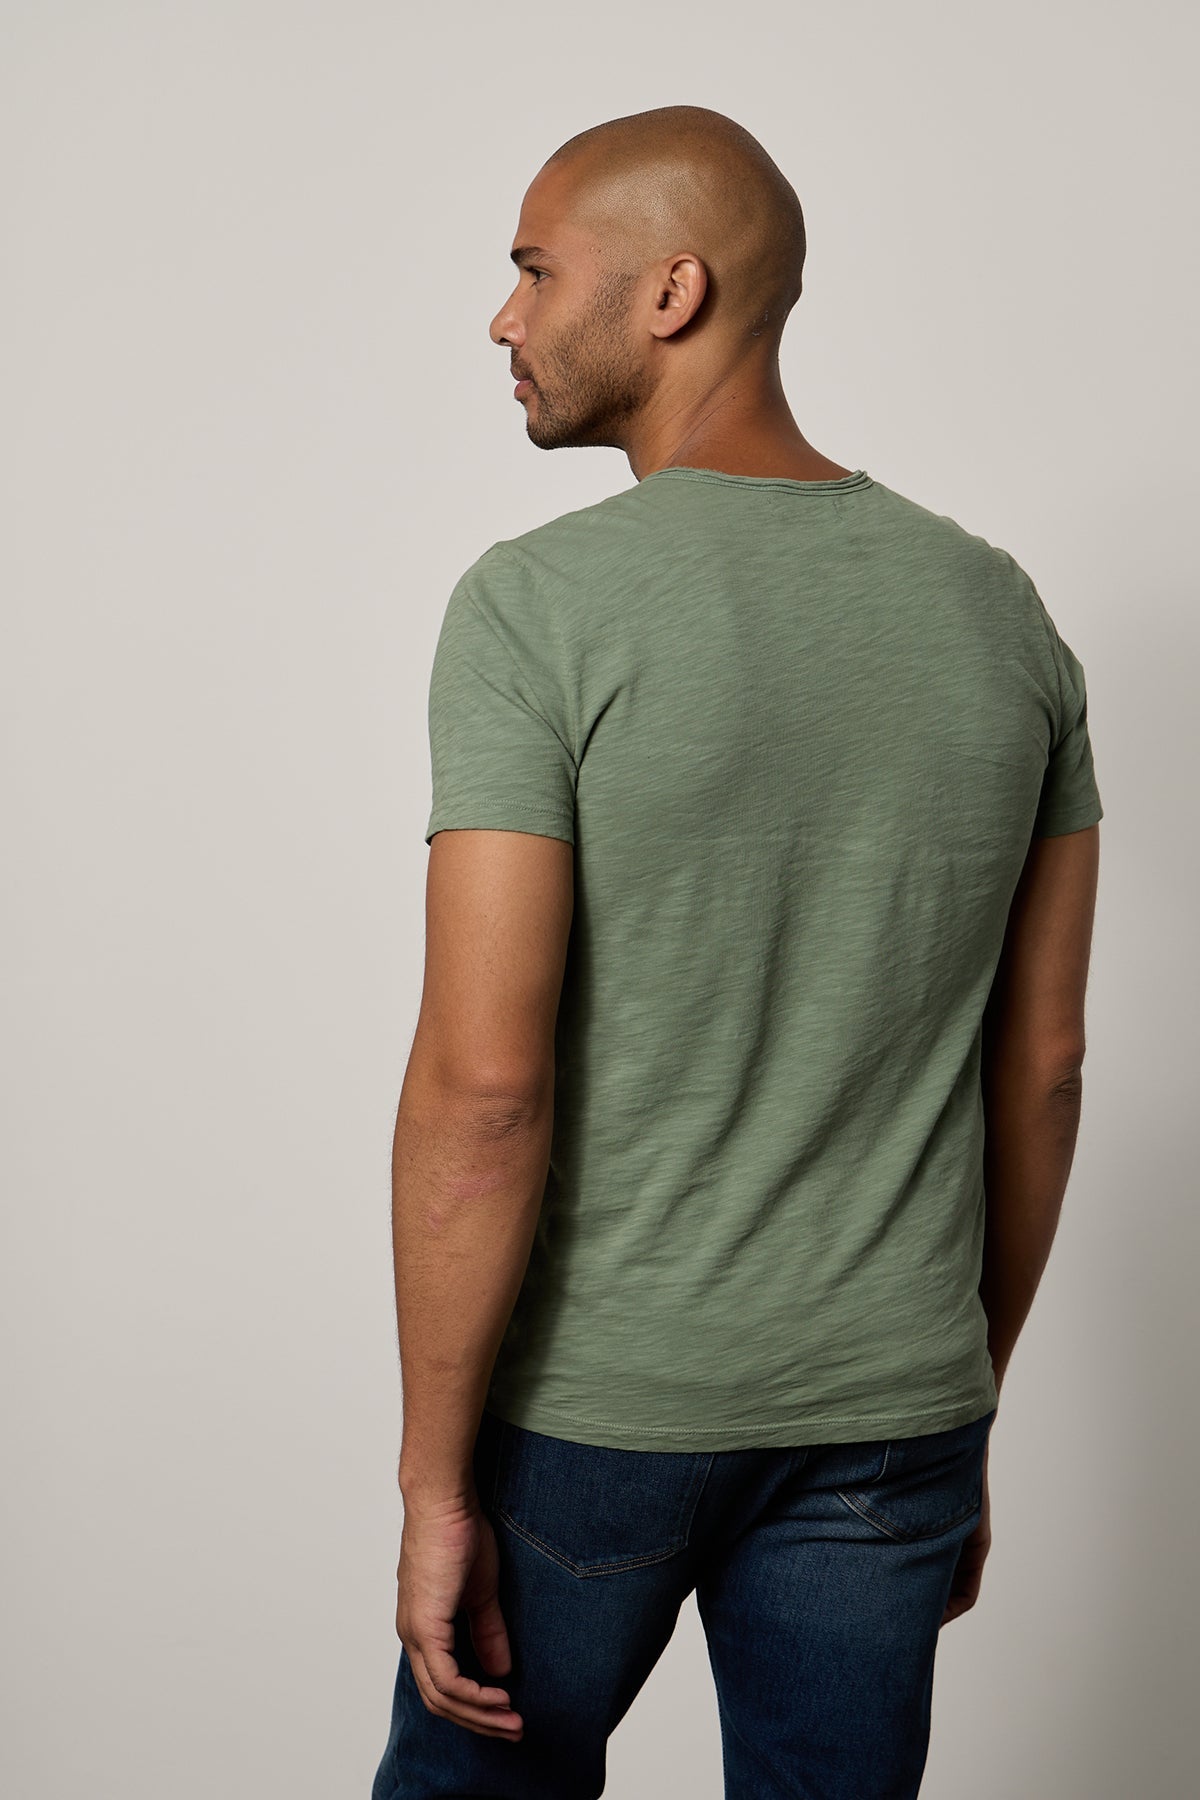 the back of a man wearing jeans and a green CHAD RAW EDGE COTTON SLUB POCKET TEE by Velvet by Graham & Spencer.-35206253412545